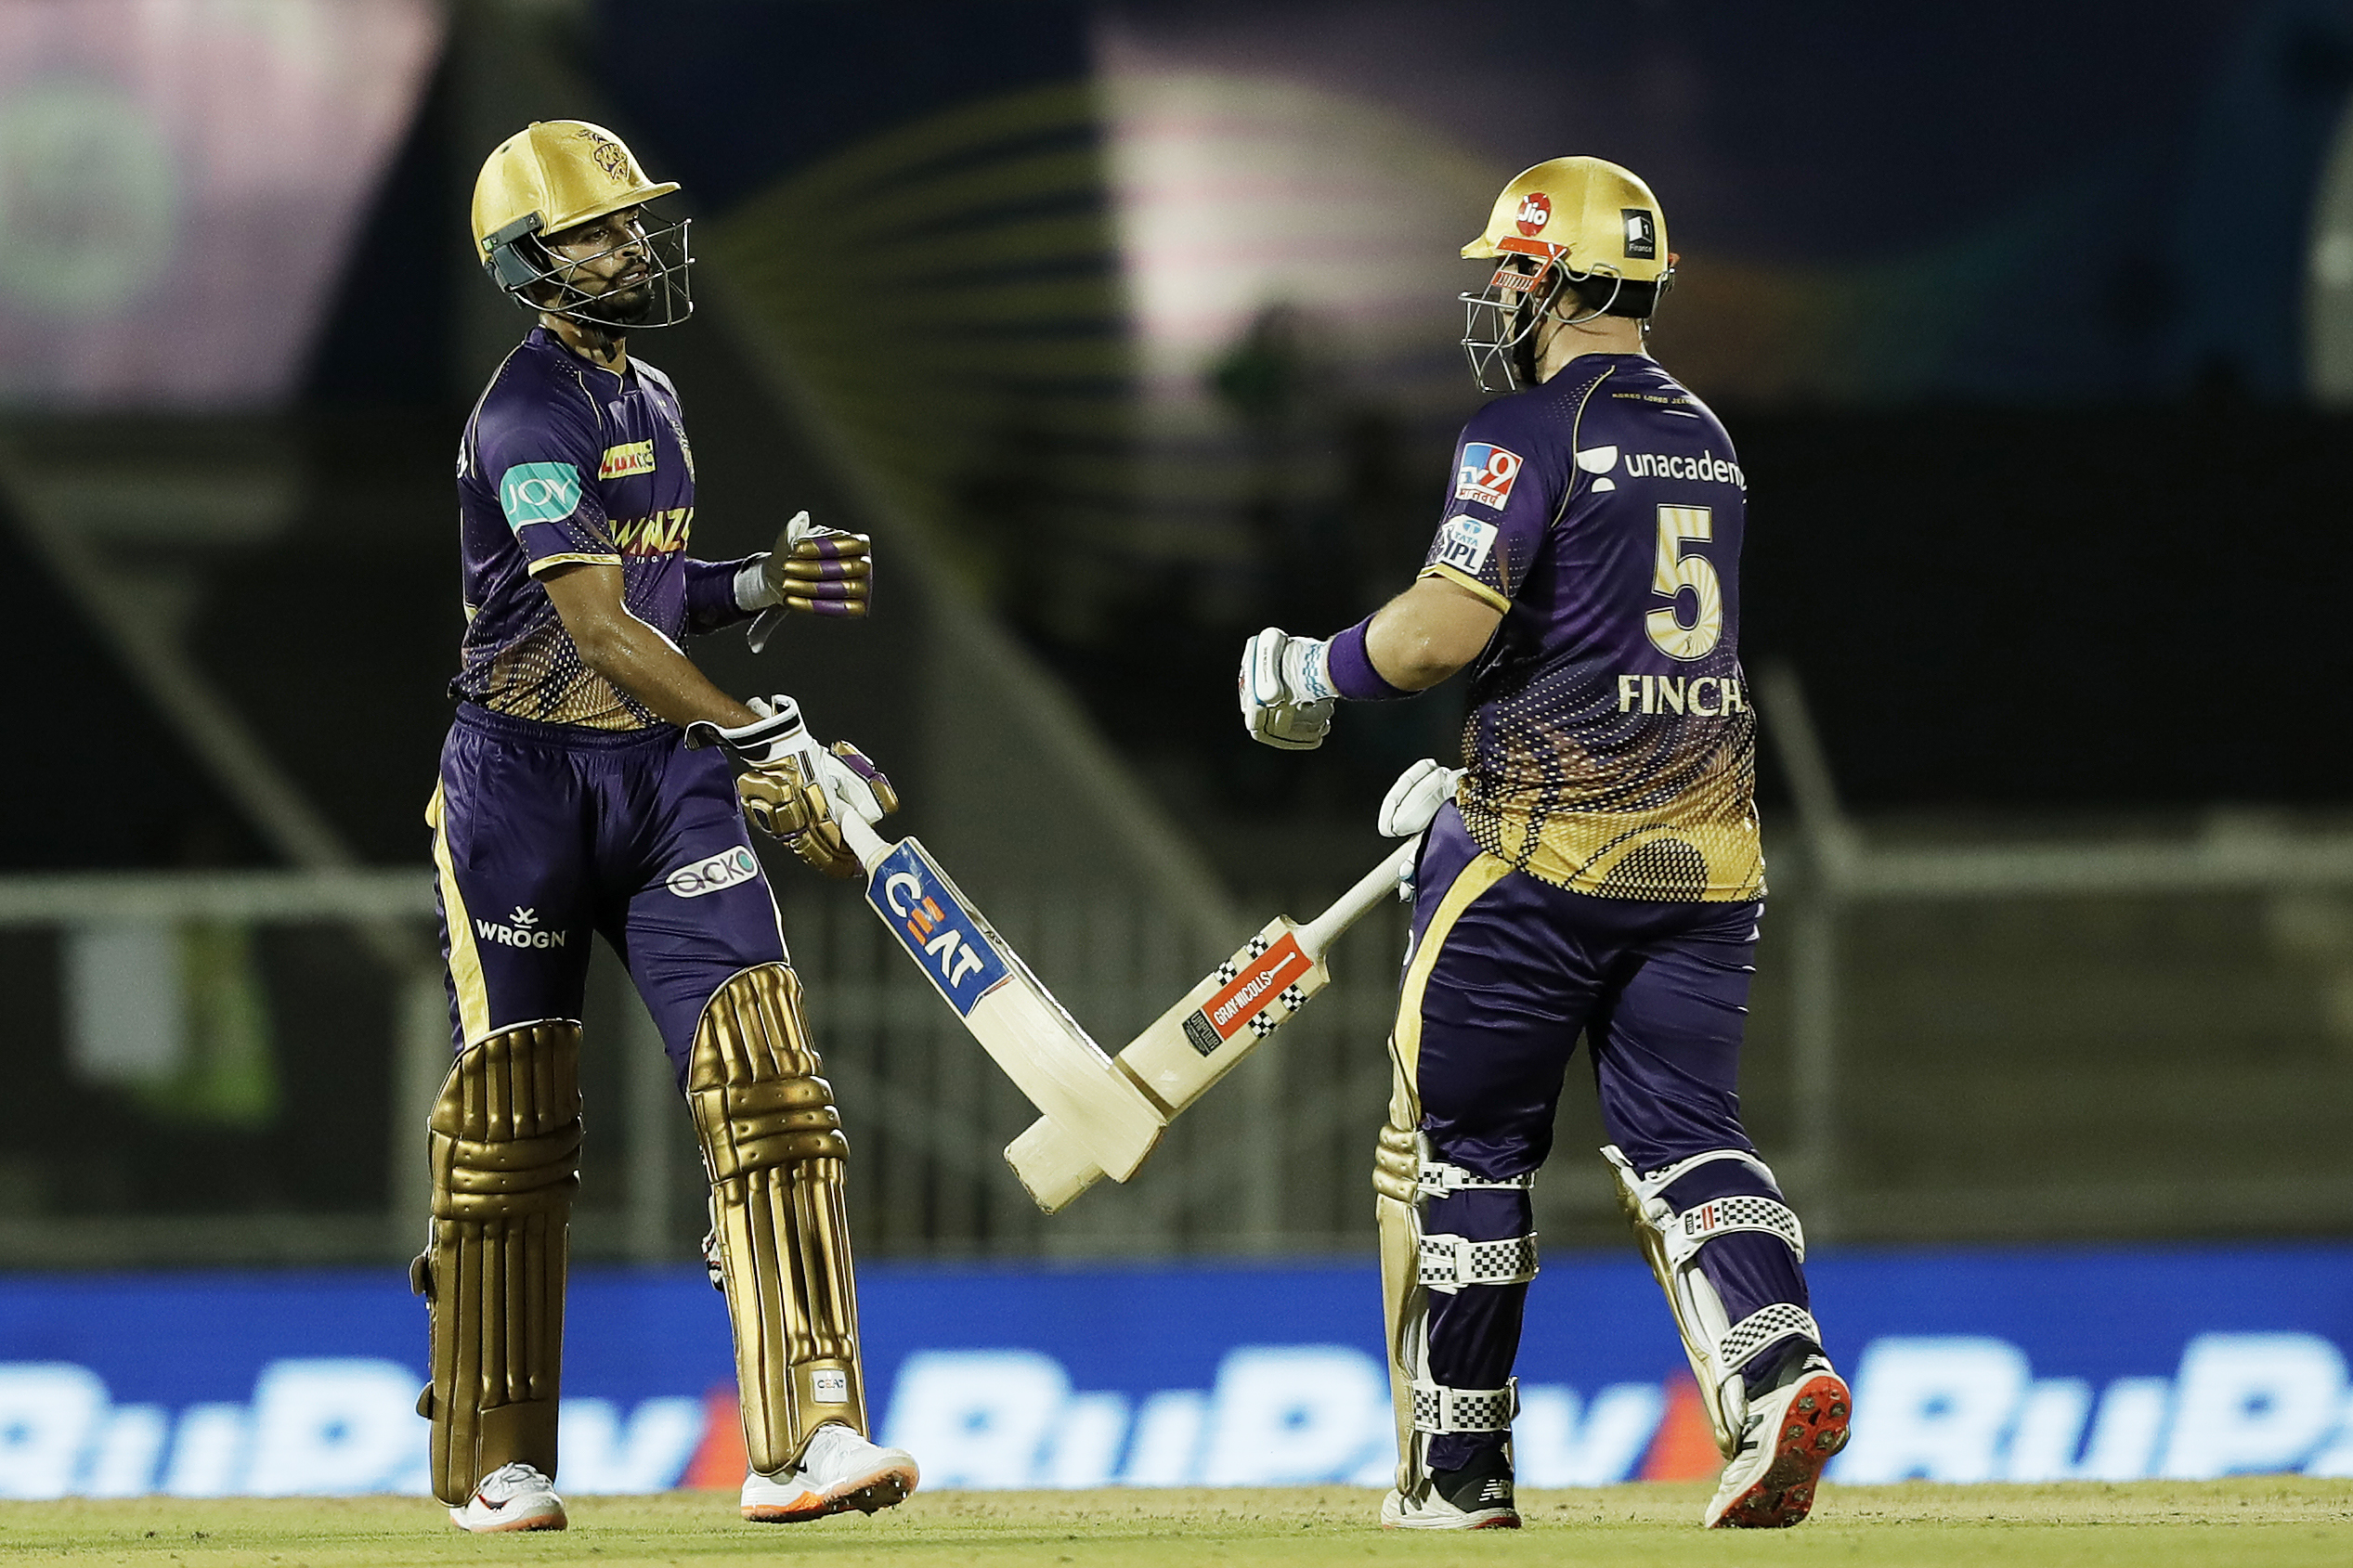 Rajasthan Royals defeated Kolkata Knight Riders by 7 runs thanks to Buttler's century and Chahal's Hatrick